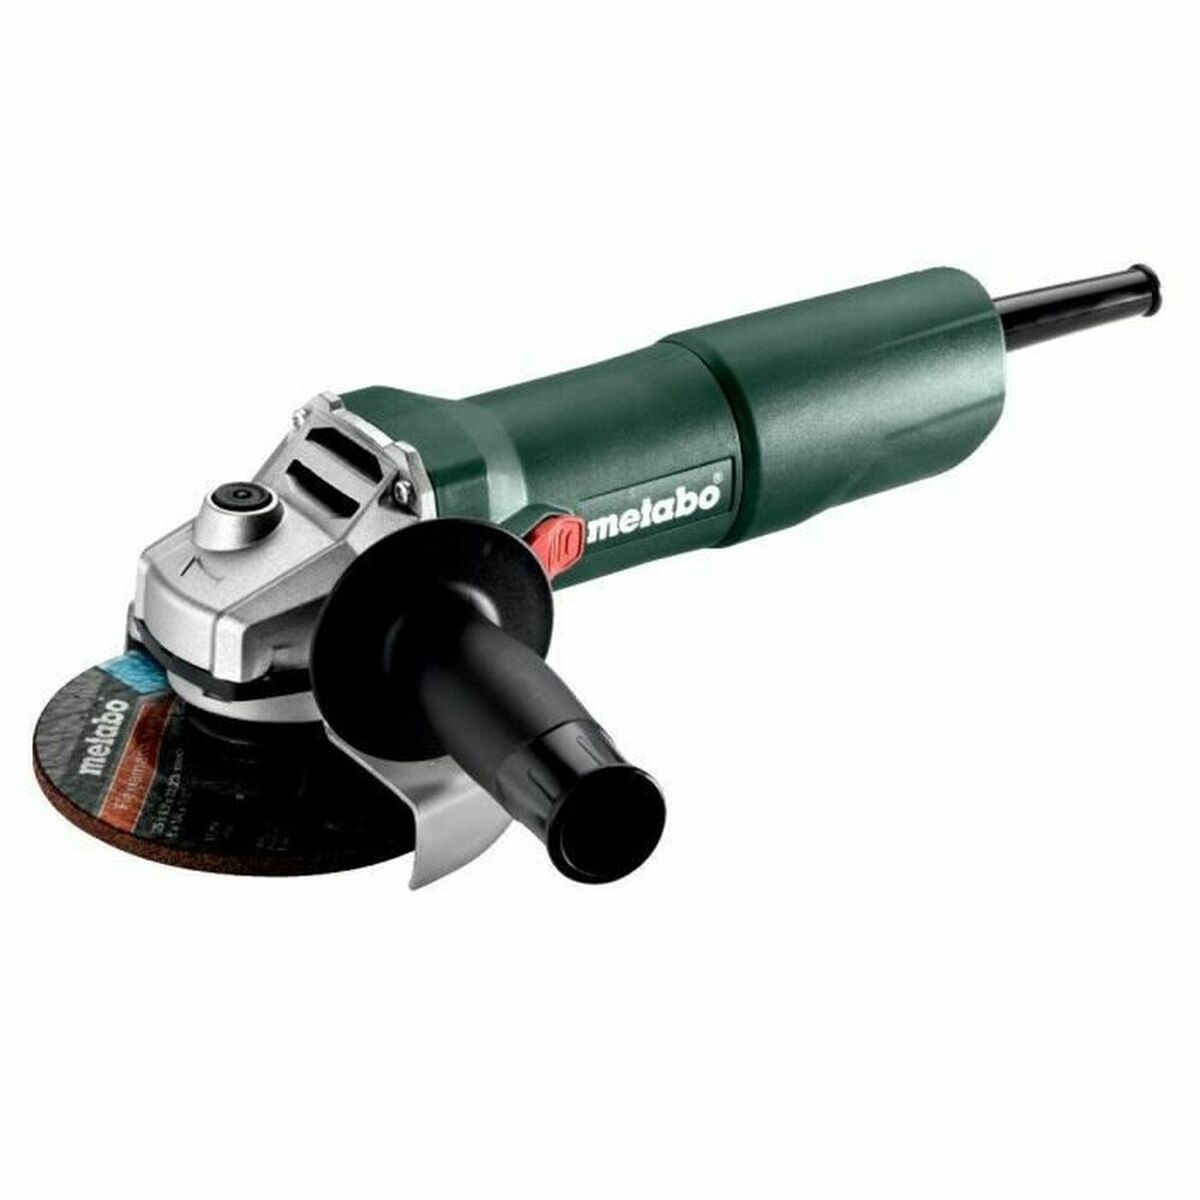 Meuleuse d'angle Metabo W 750-125 125 mm 750 W